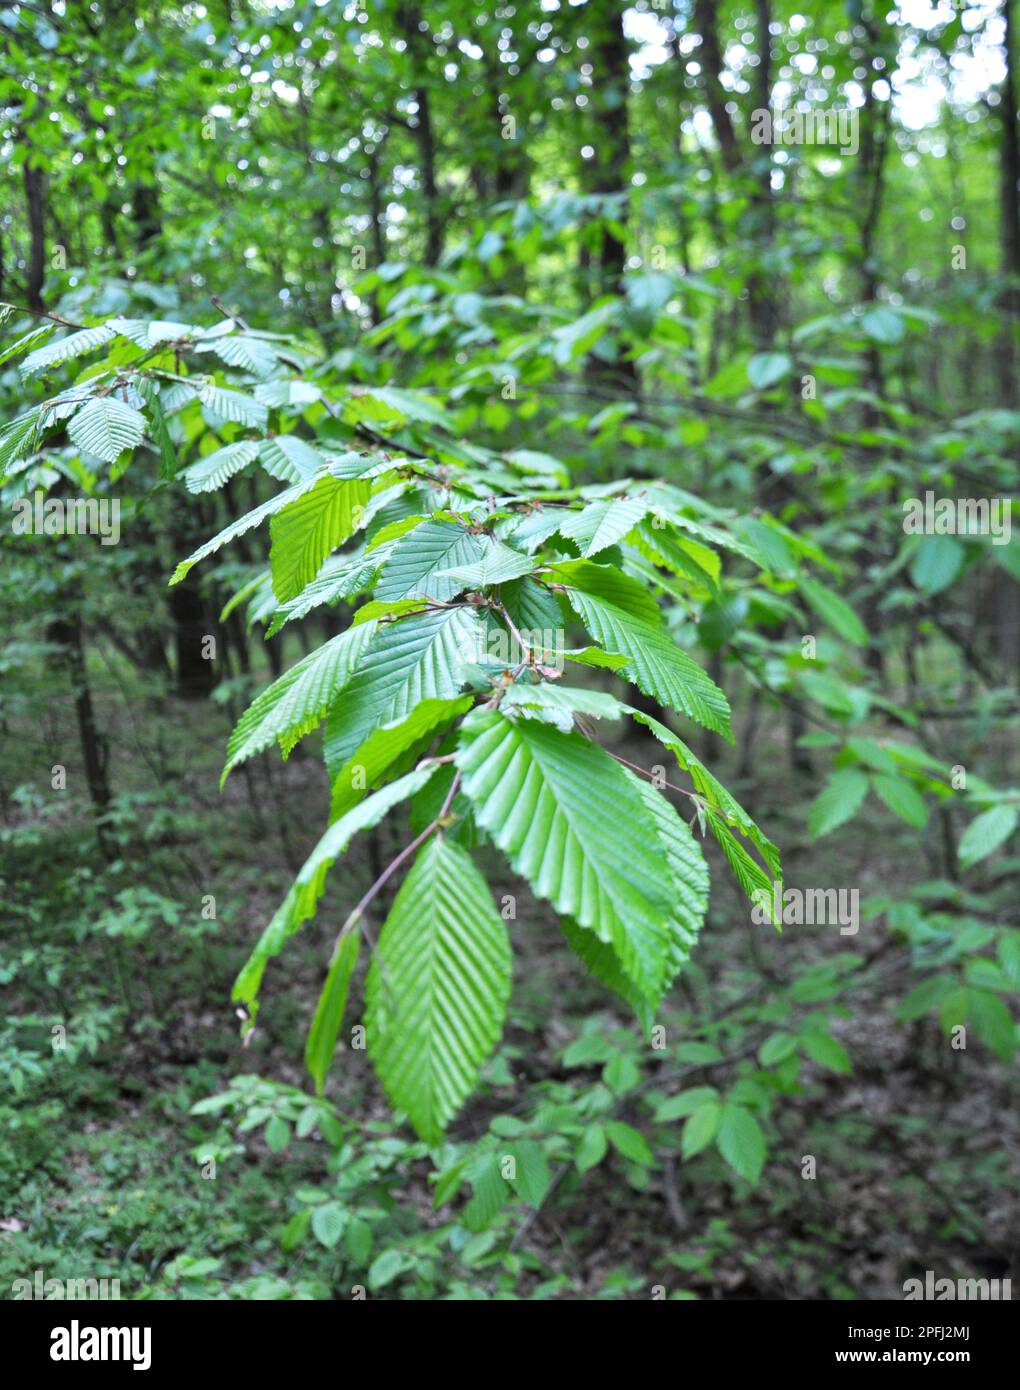 Hornbeam tree branch with young leaves growing in the forest Stock Photo